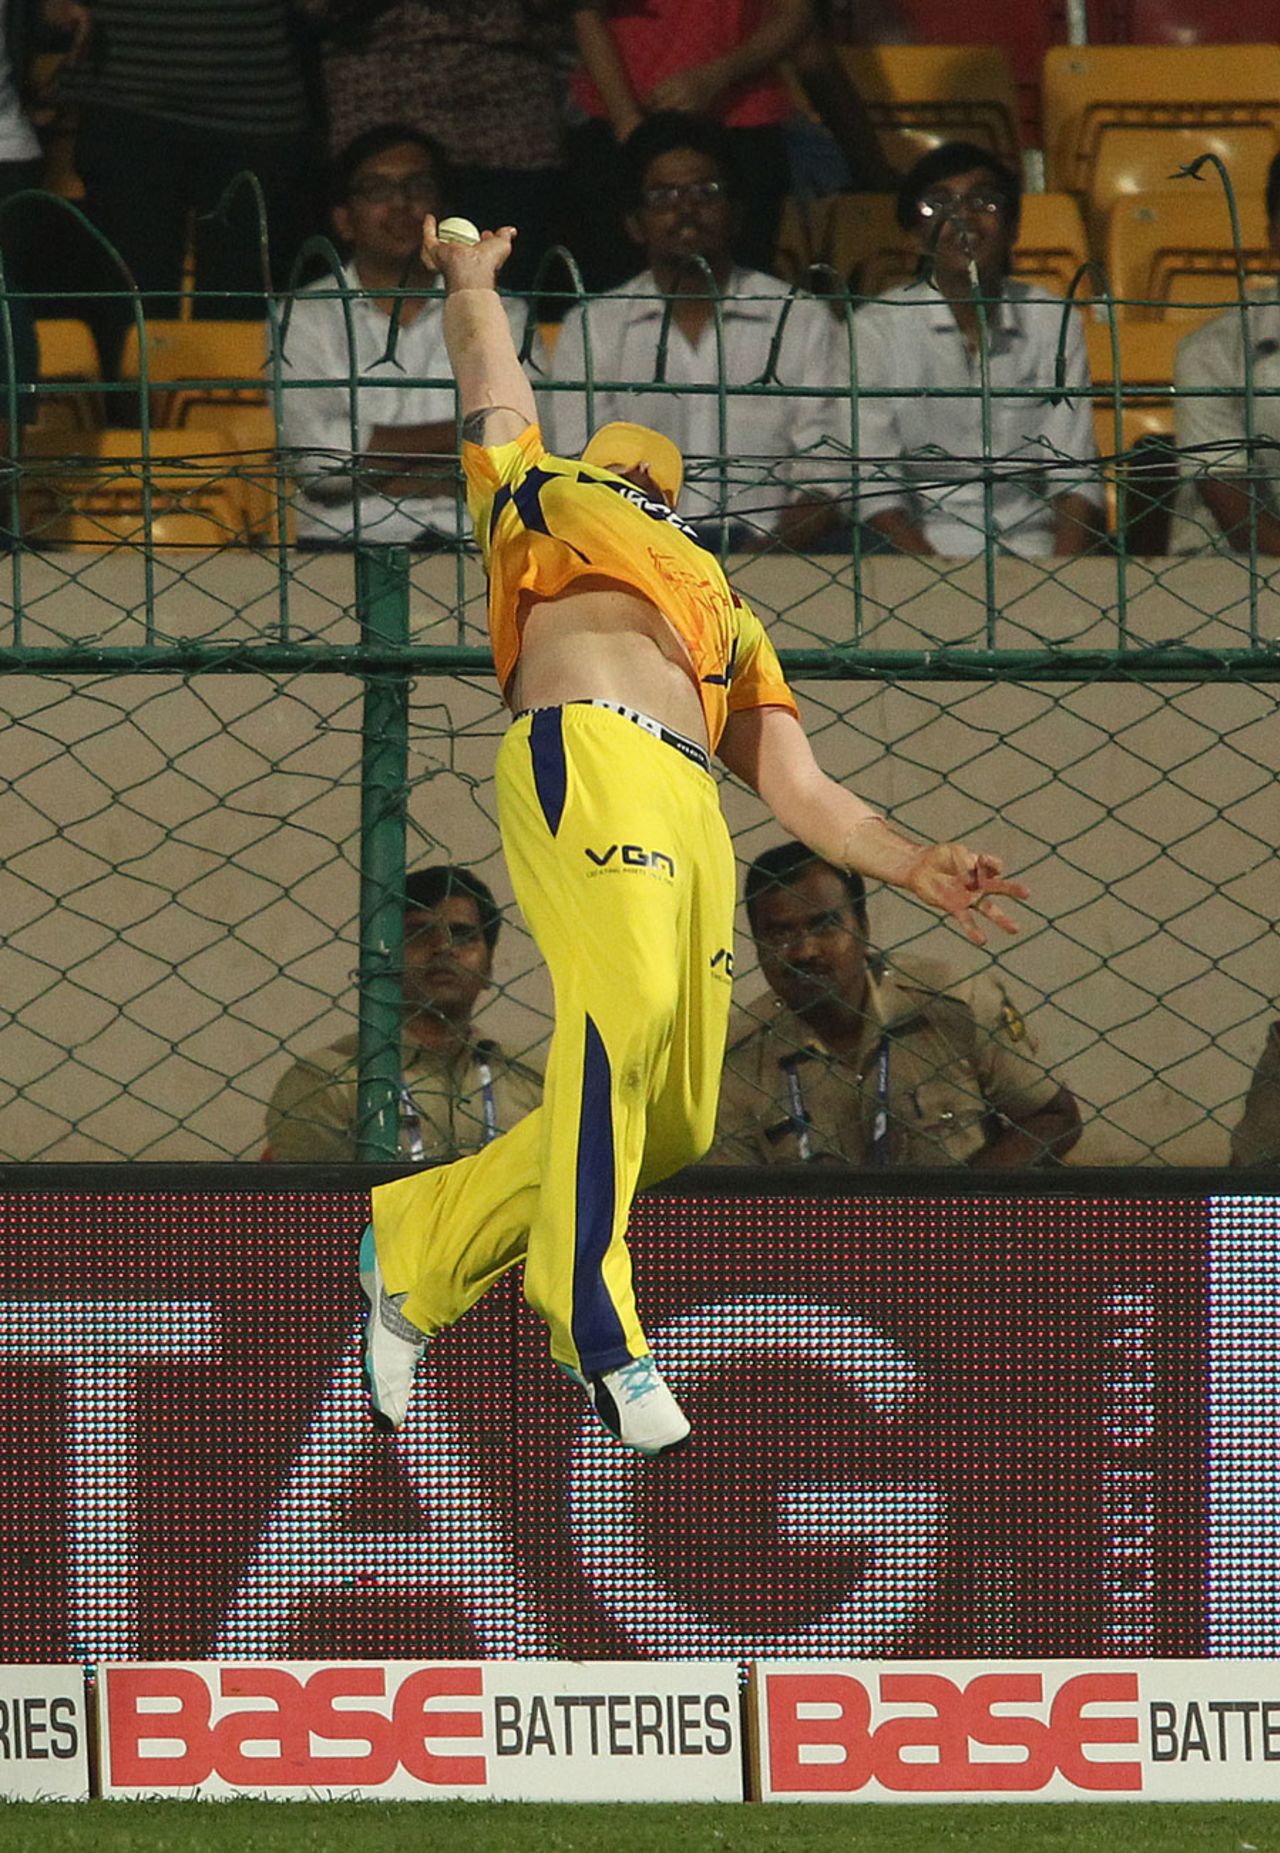 Part 2 - Brendon McCullum at full stretch, arching backwards as he catches the ball, Chennai Super Kings v Dolphins, CLT20, Group A, Bangalore, September 22, 2014